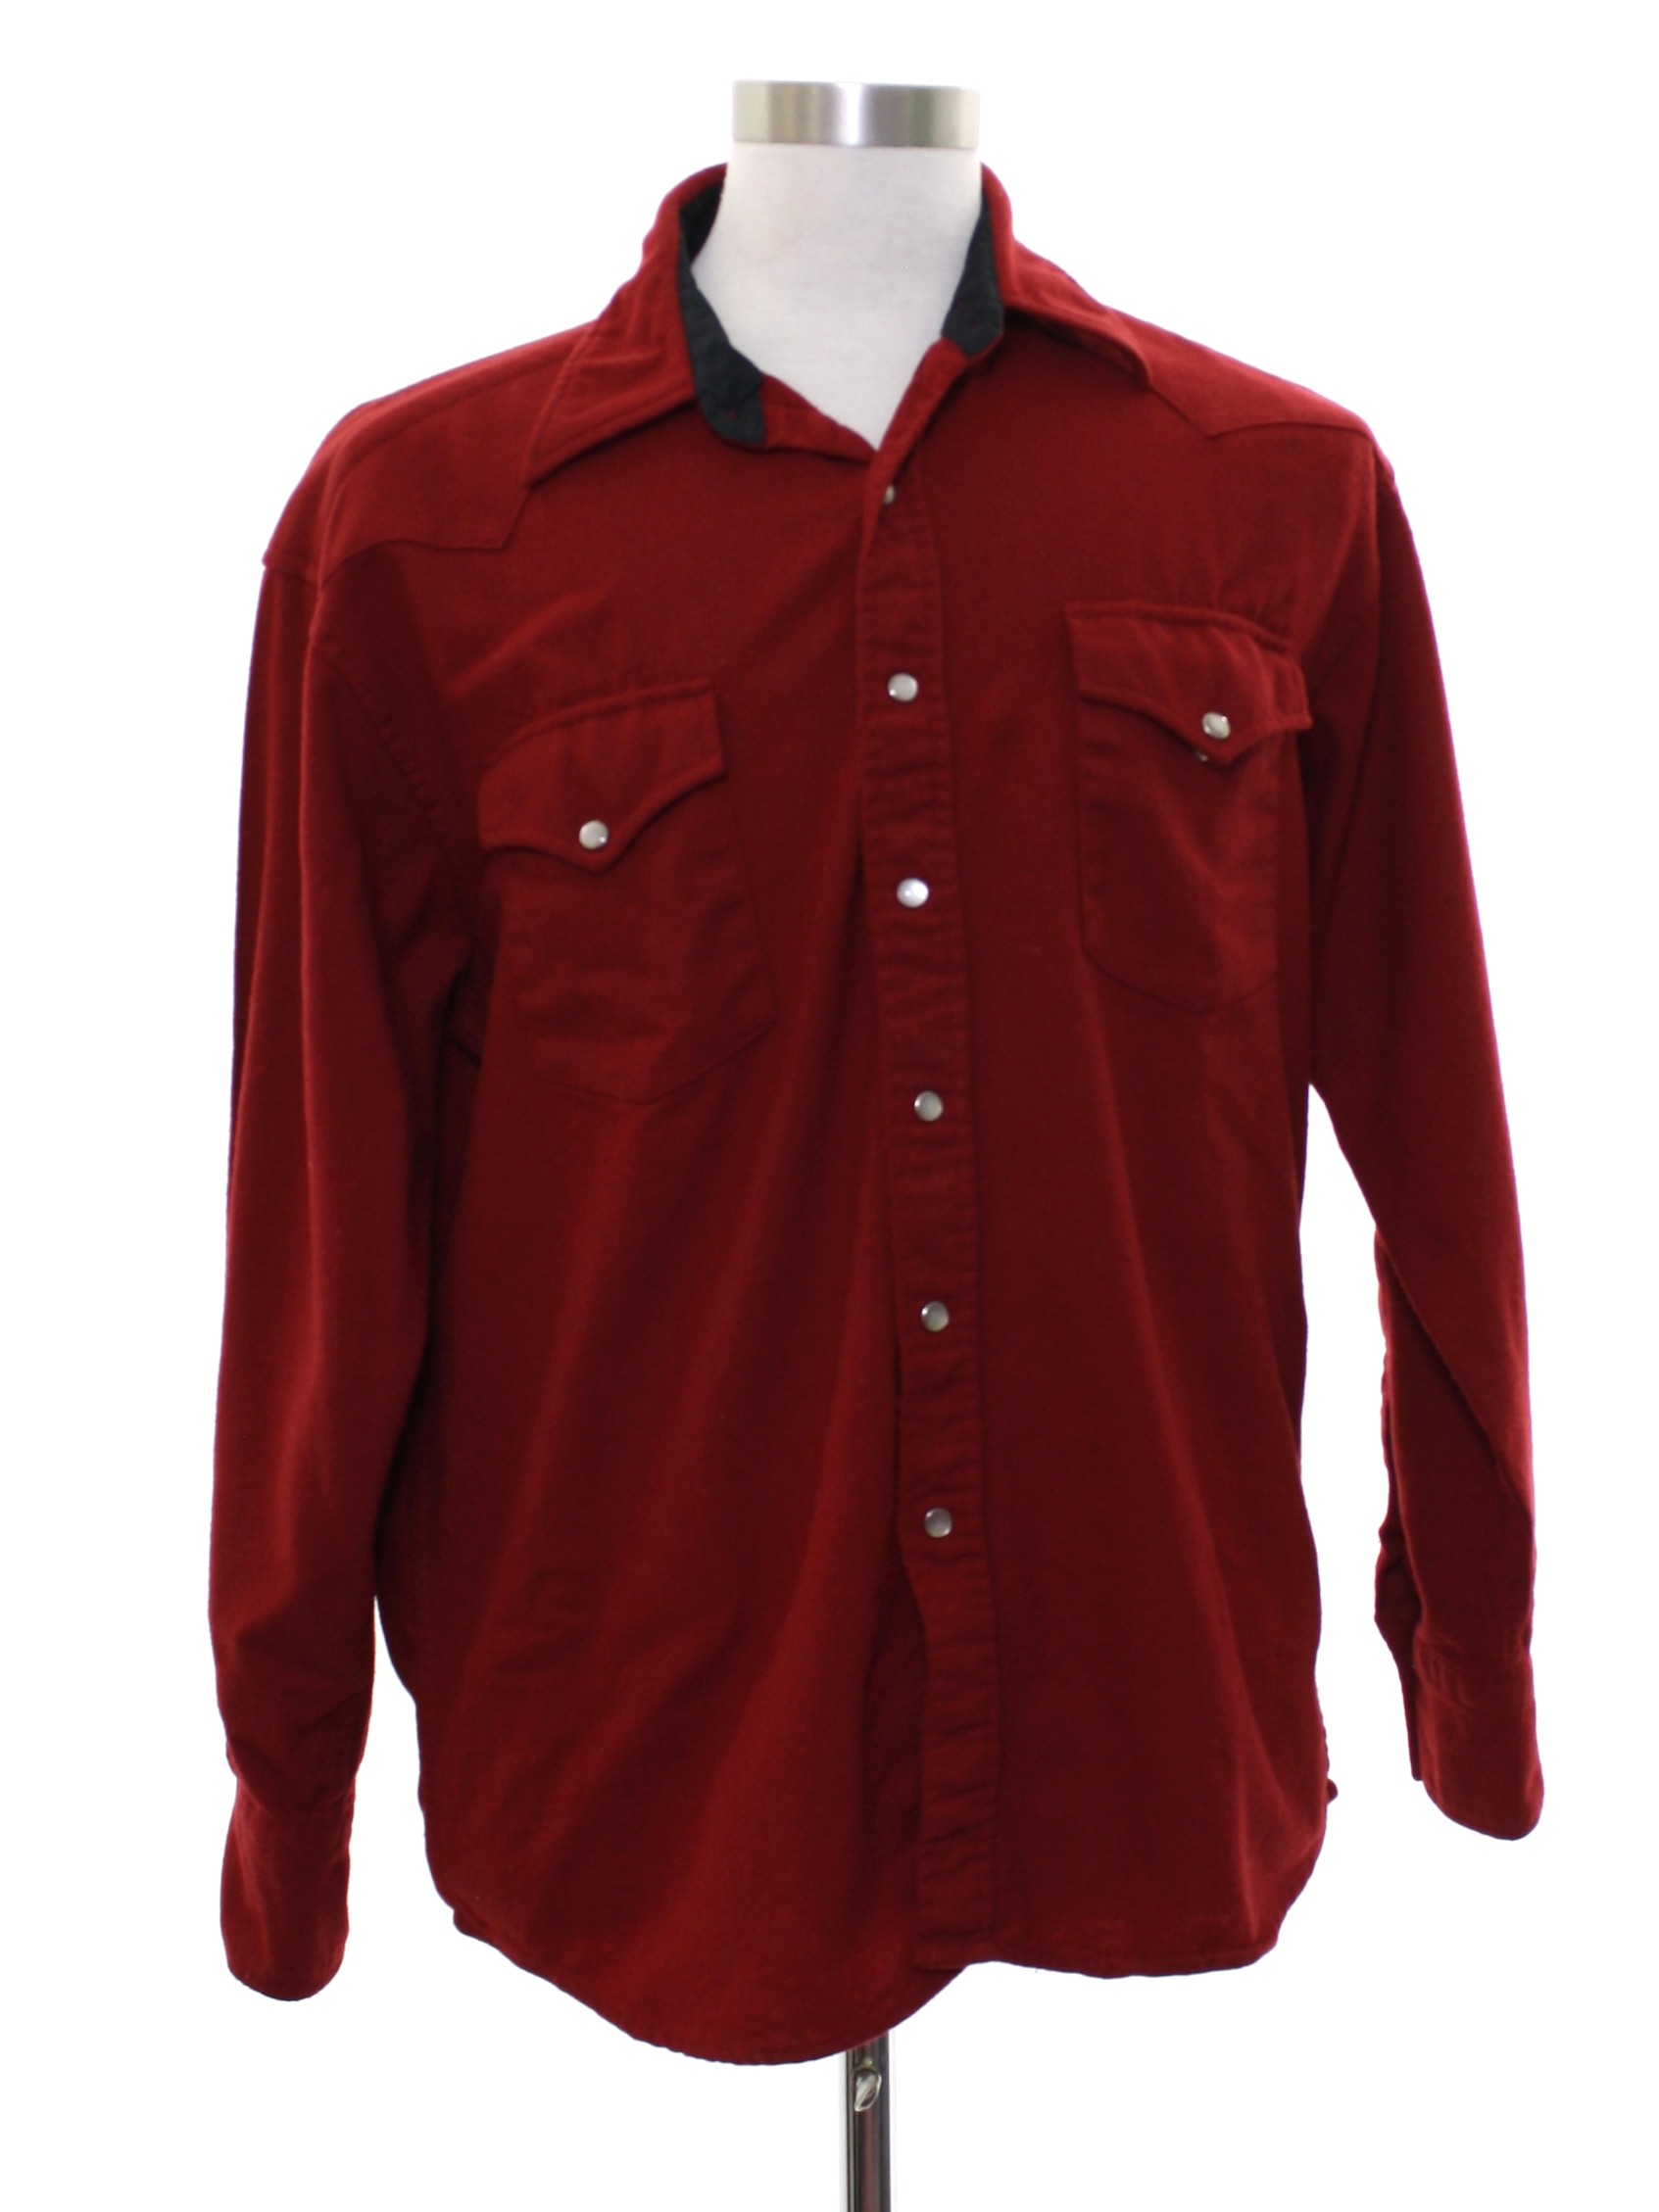 Vintage 80s Western Shirt: 80s -Pendleton- Mens cranberry red heavy ...